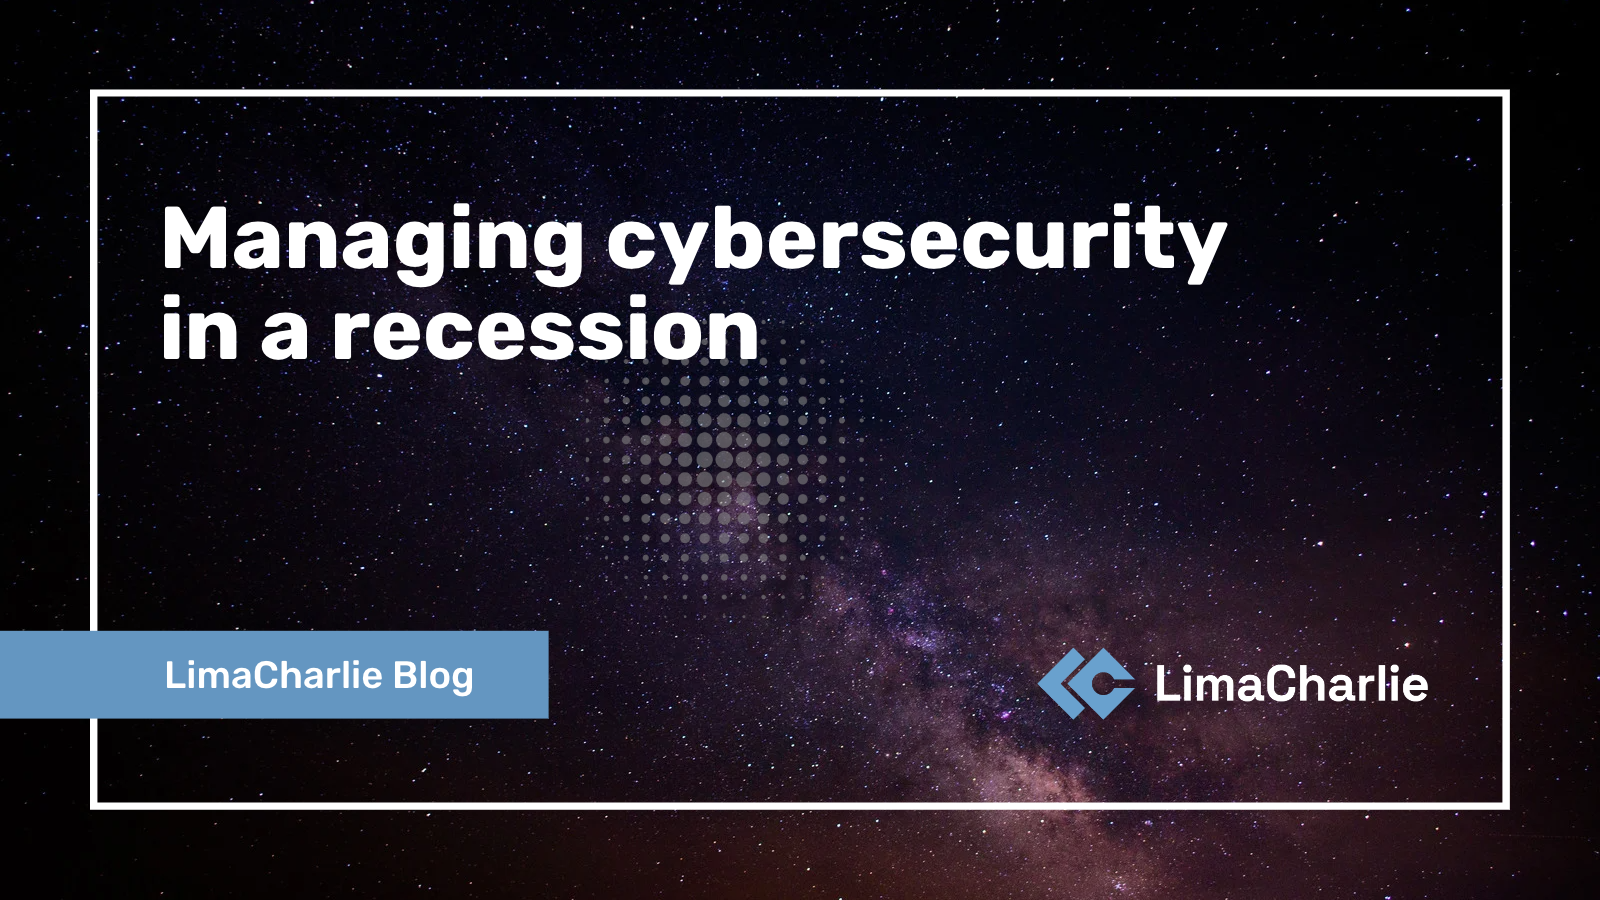 Managing cybersecurity in a recession. LimaCharlie blog.